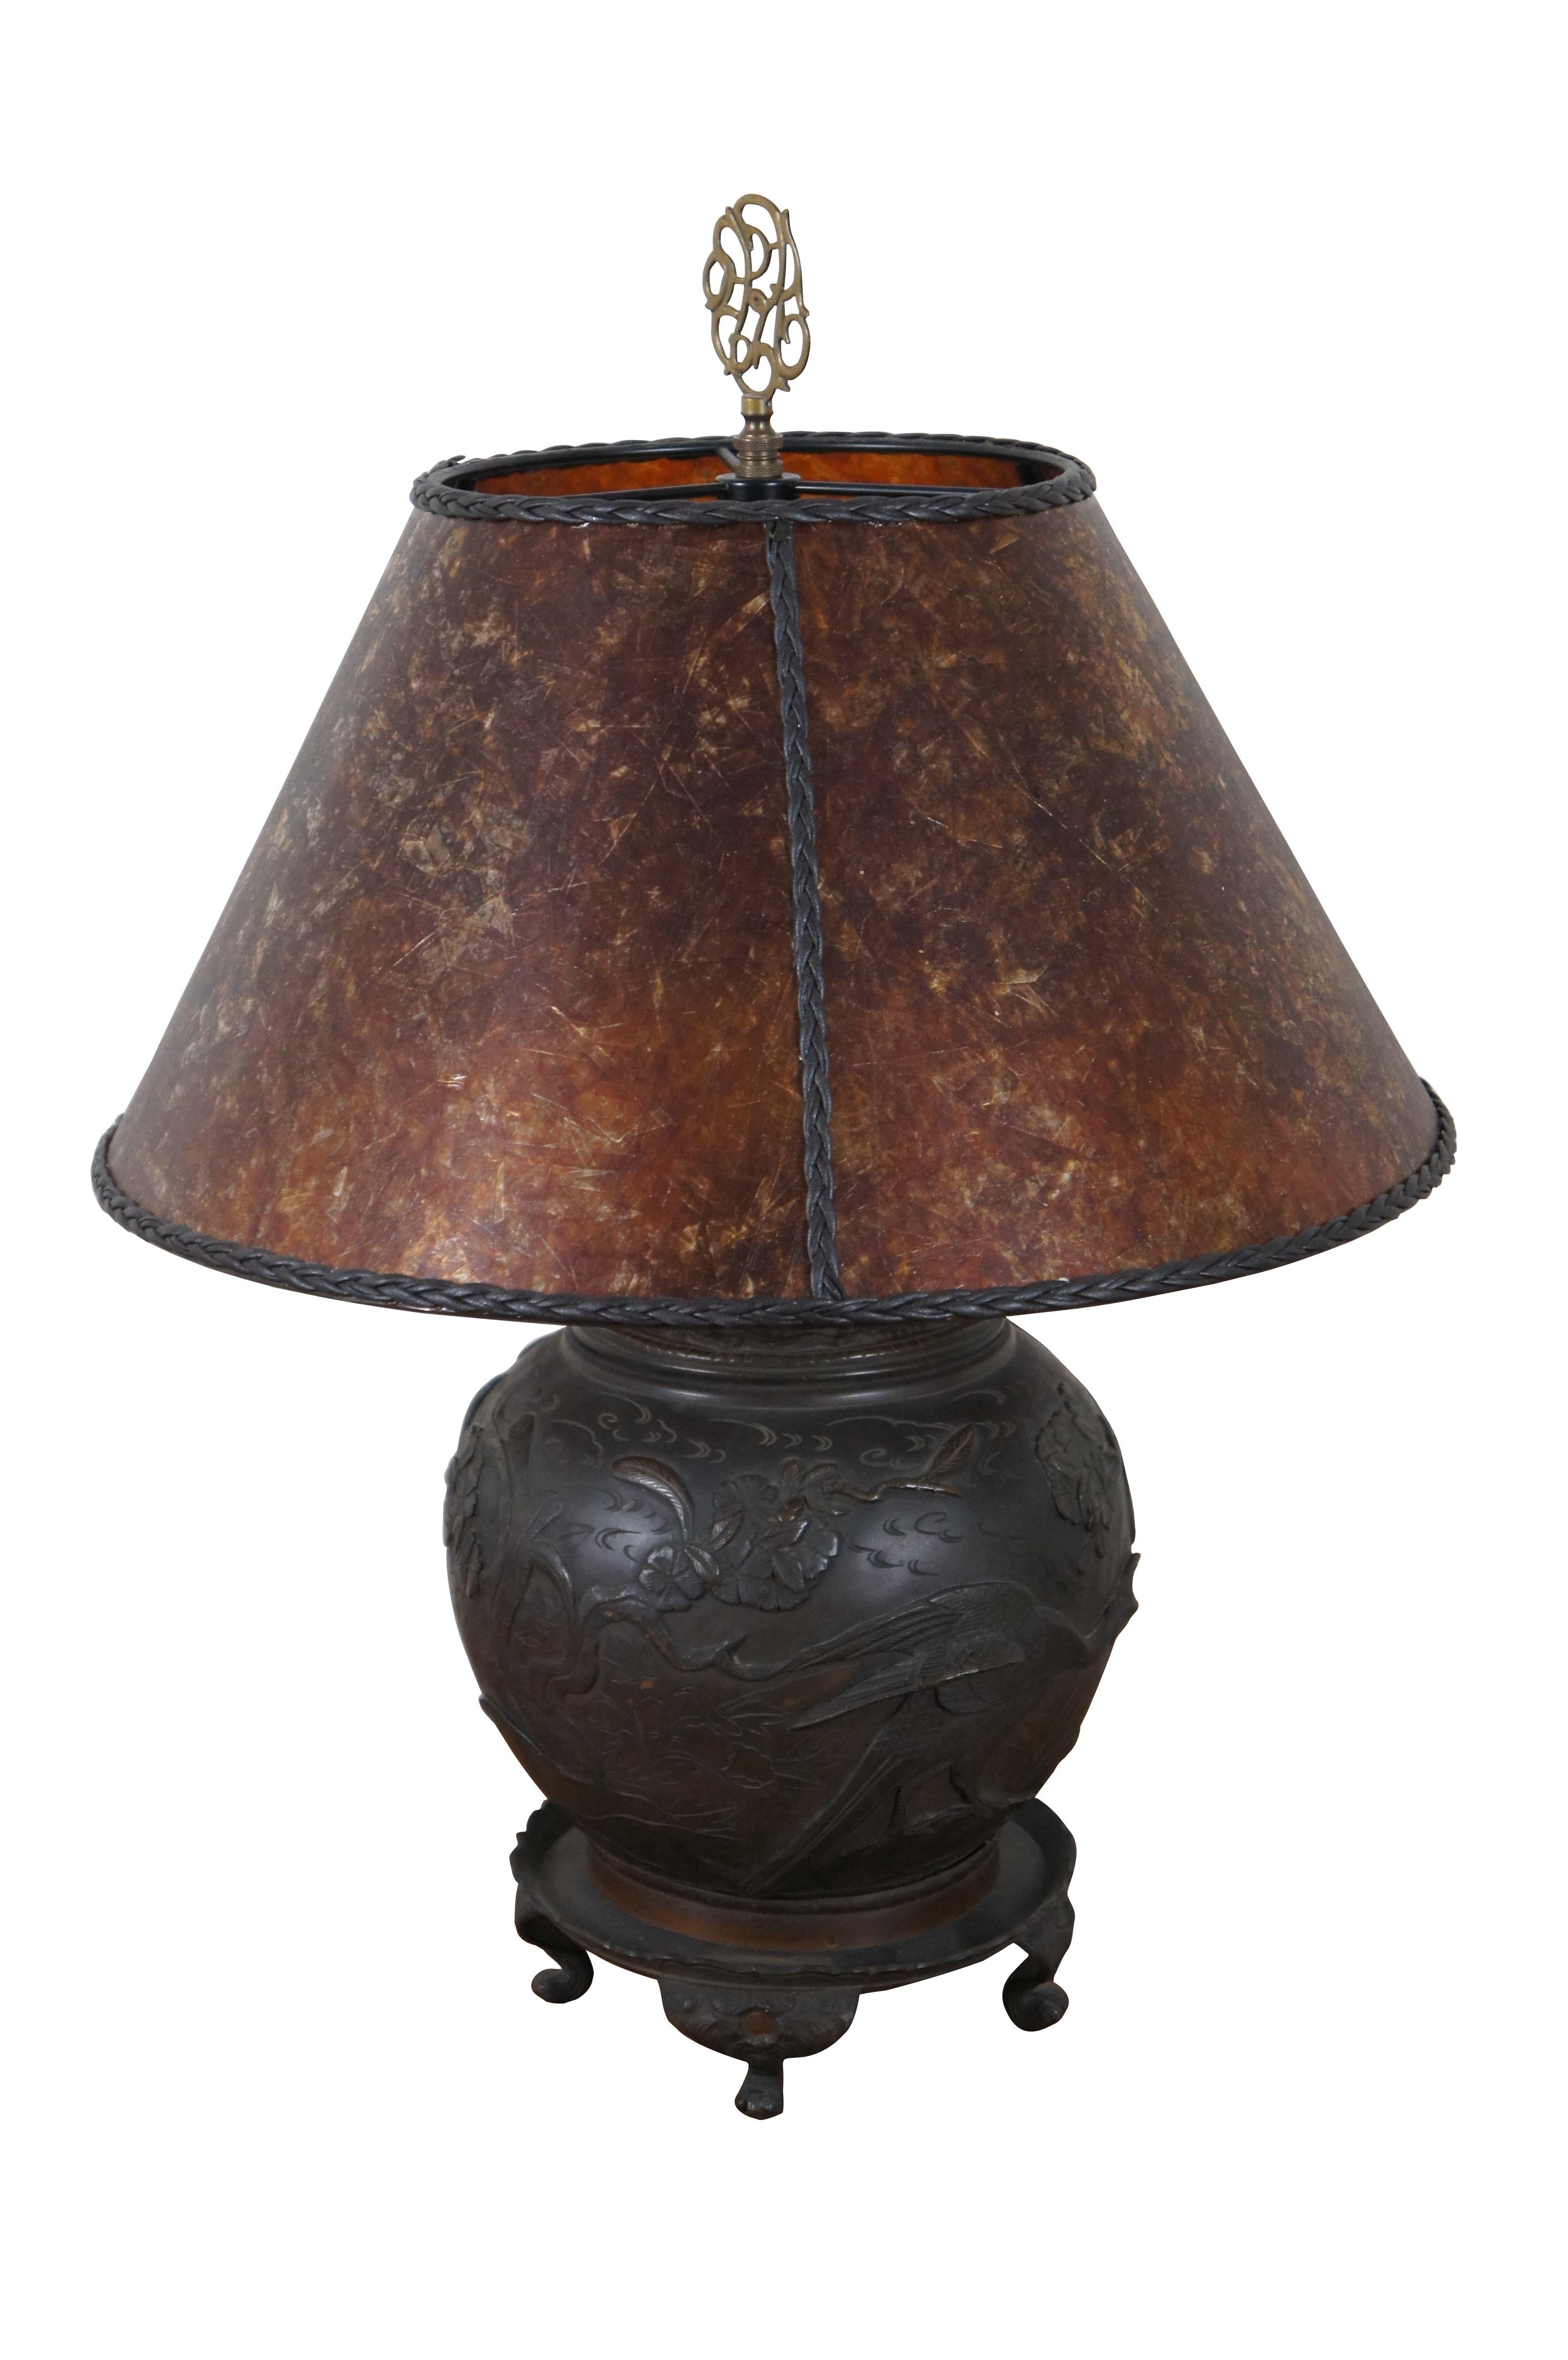 20th century Japanese cast bronze table lamp in the shape of a ginger jar / urn sitting on a footed pedestal, cast with a relief of blossoming cherry trees and cranes. Paired with a translucent multi-toned amber shade trimmed in black braid.